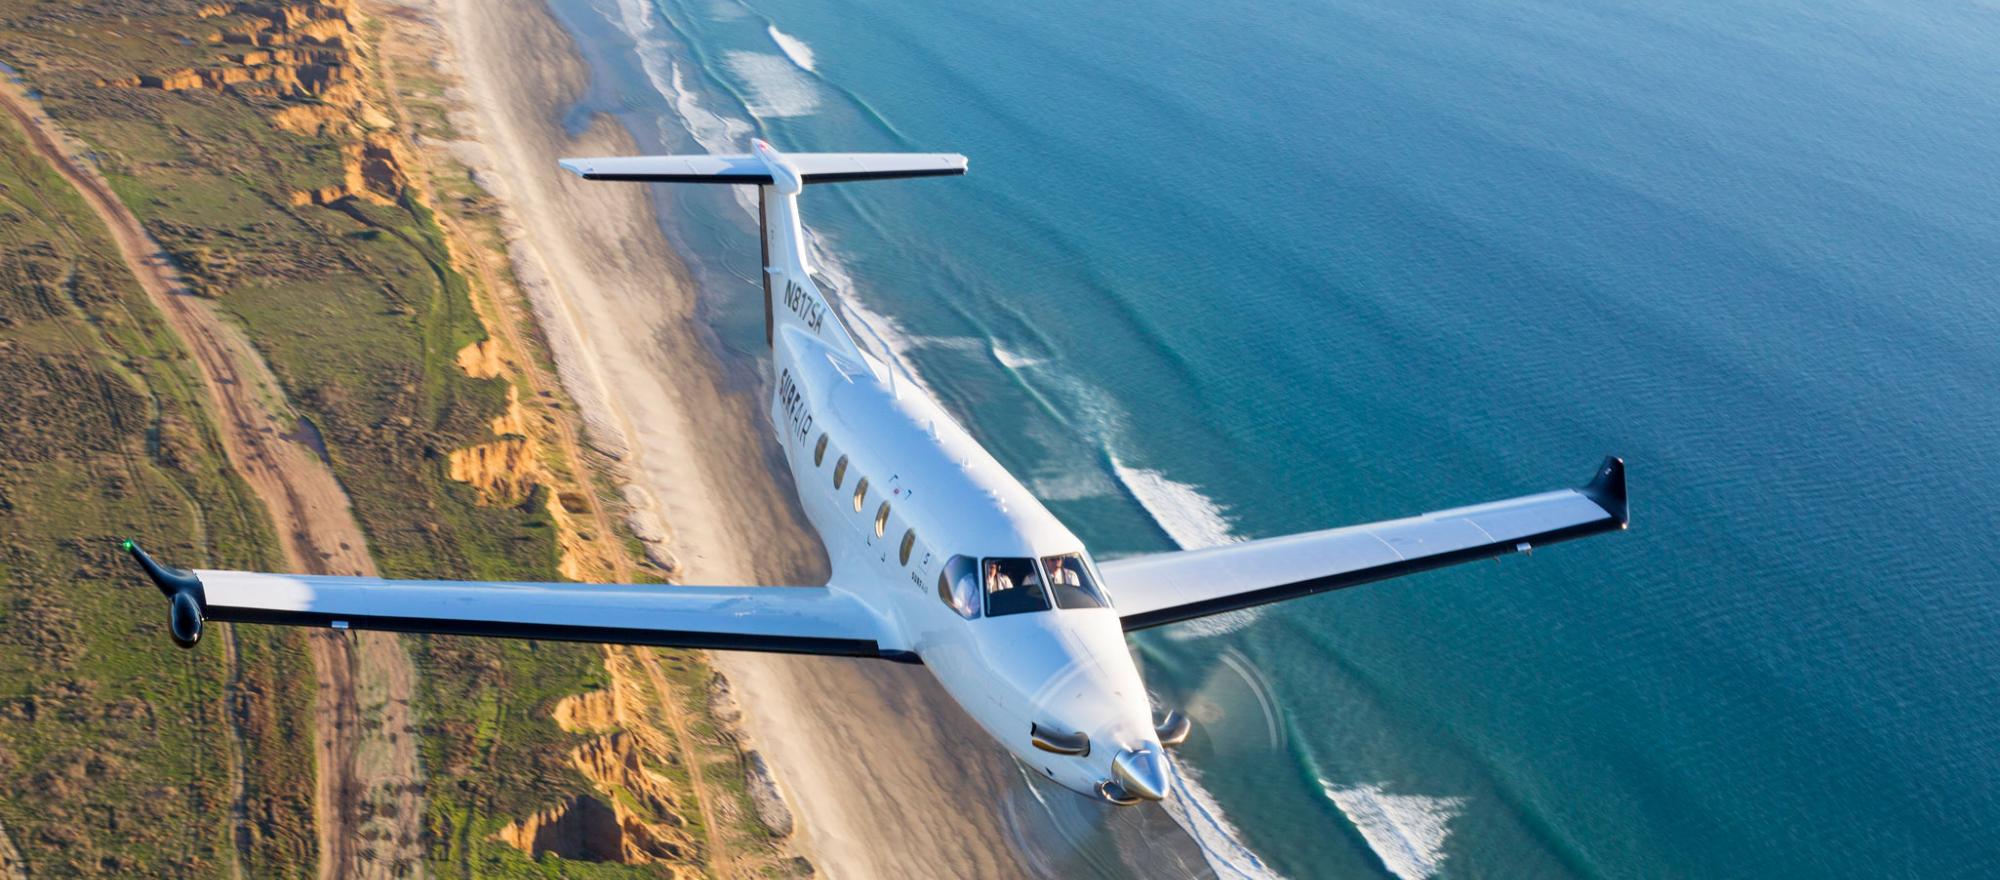 Business Jet Flying To Illustrate Flying Privately Through Membership Clubs